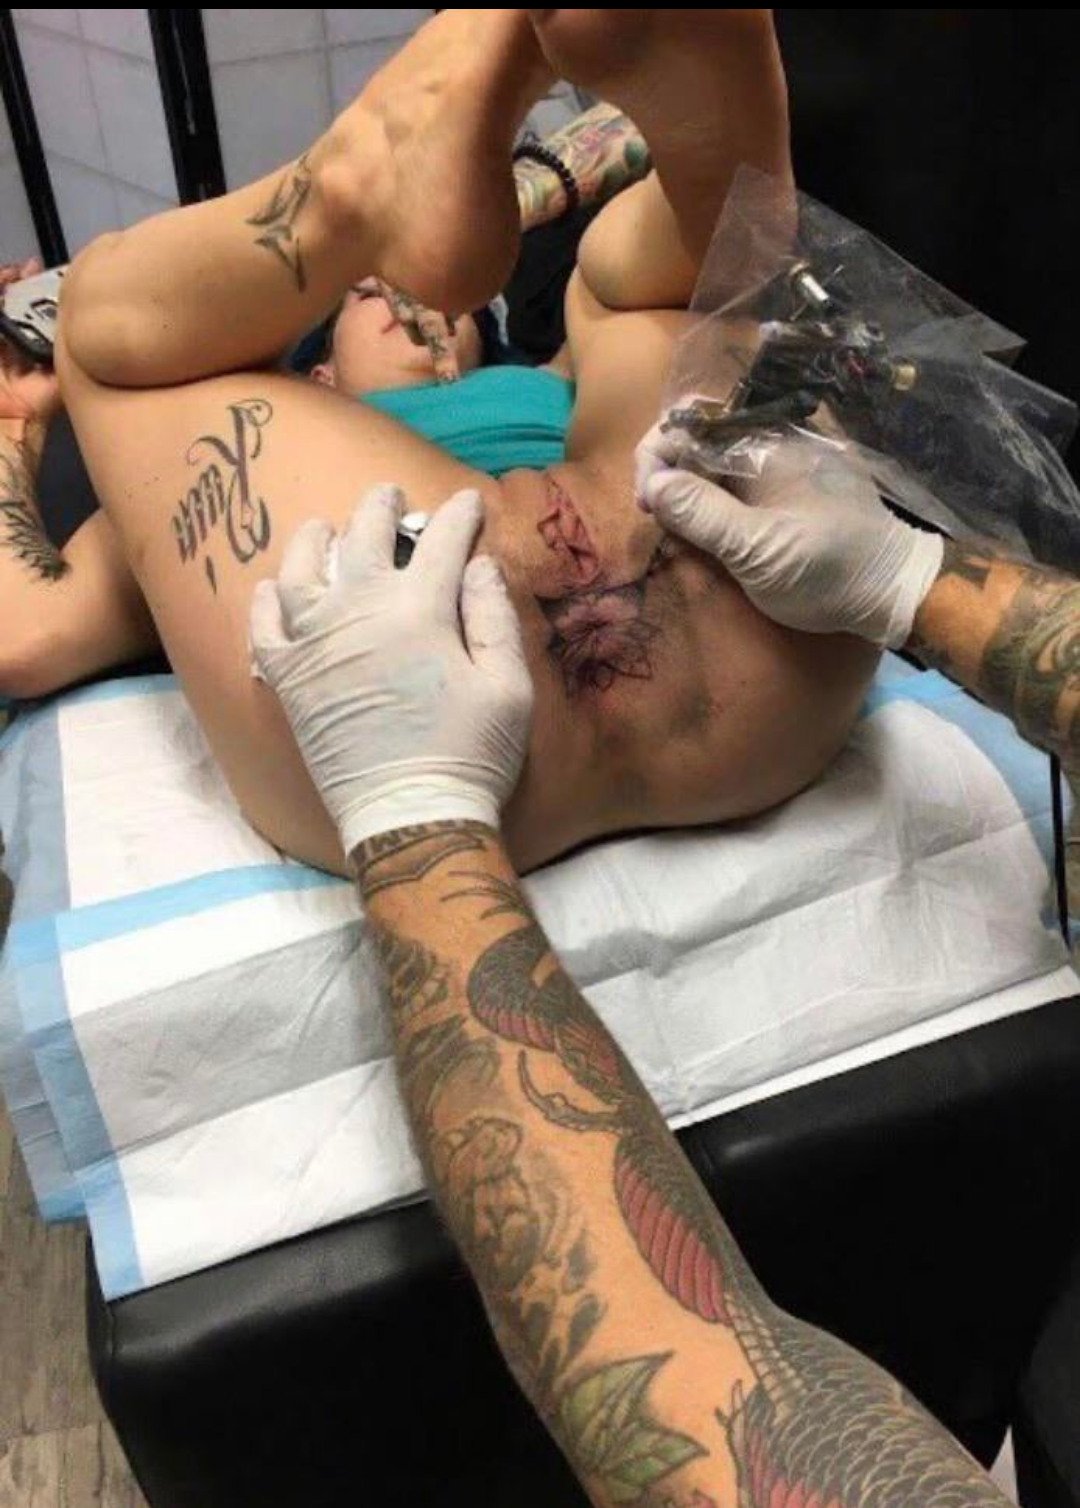 Girl With Tattoos And Piercing Trusts Man With Bushy Pussy